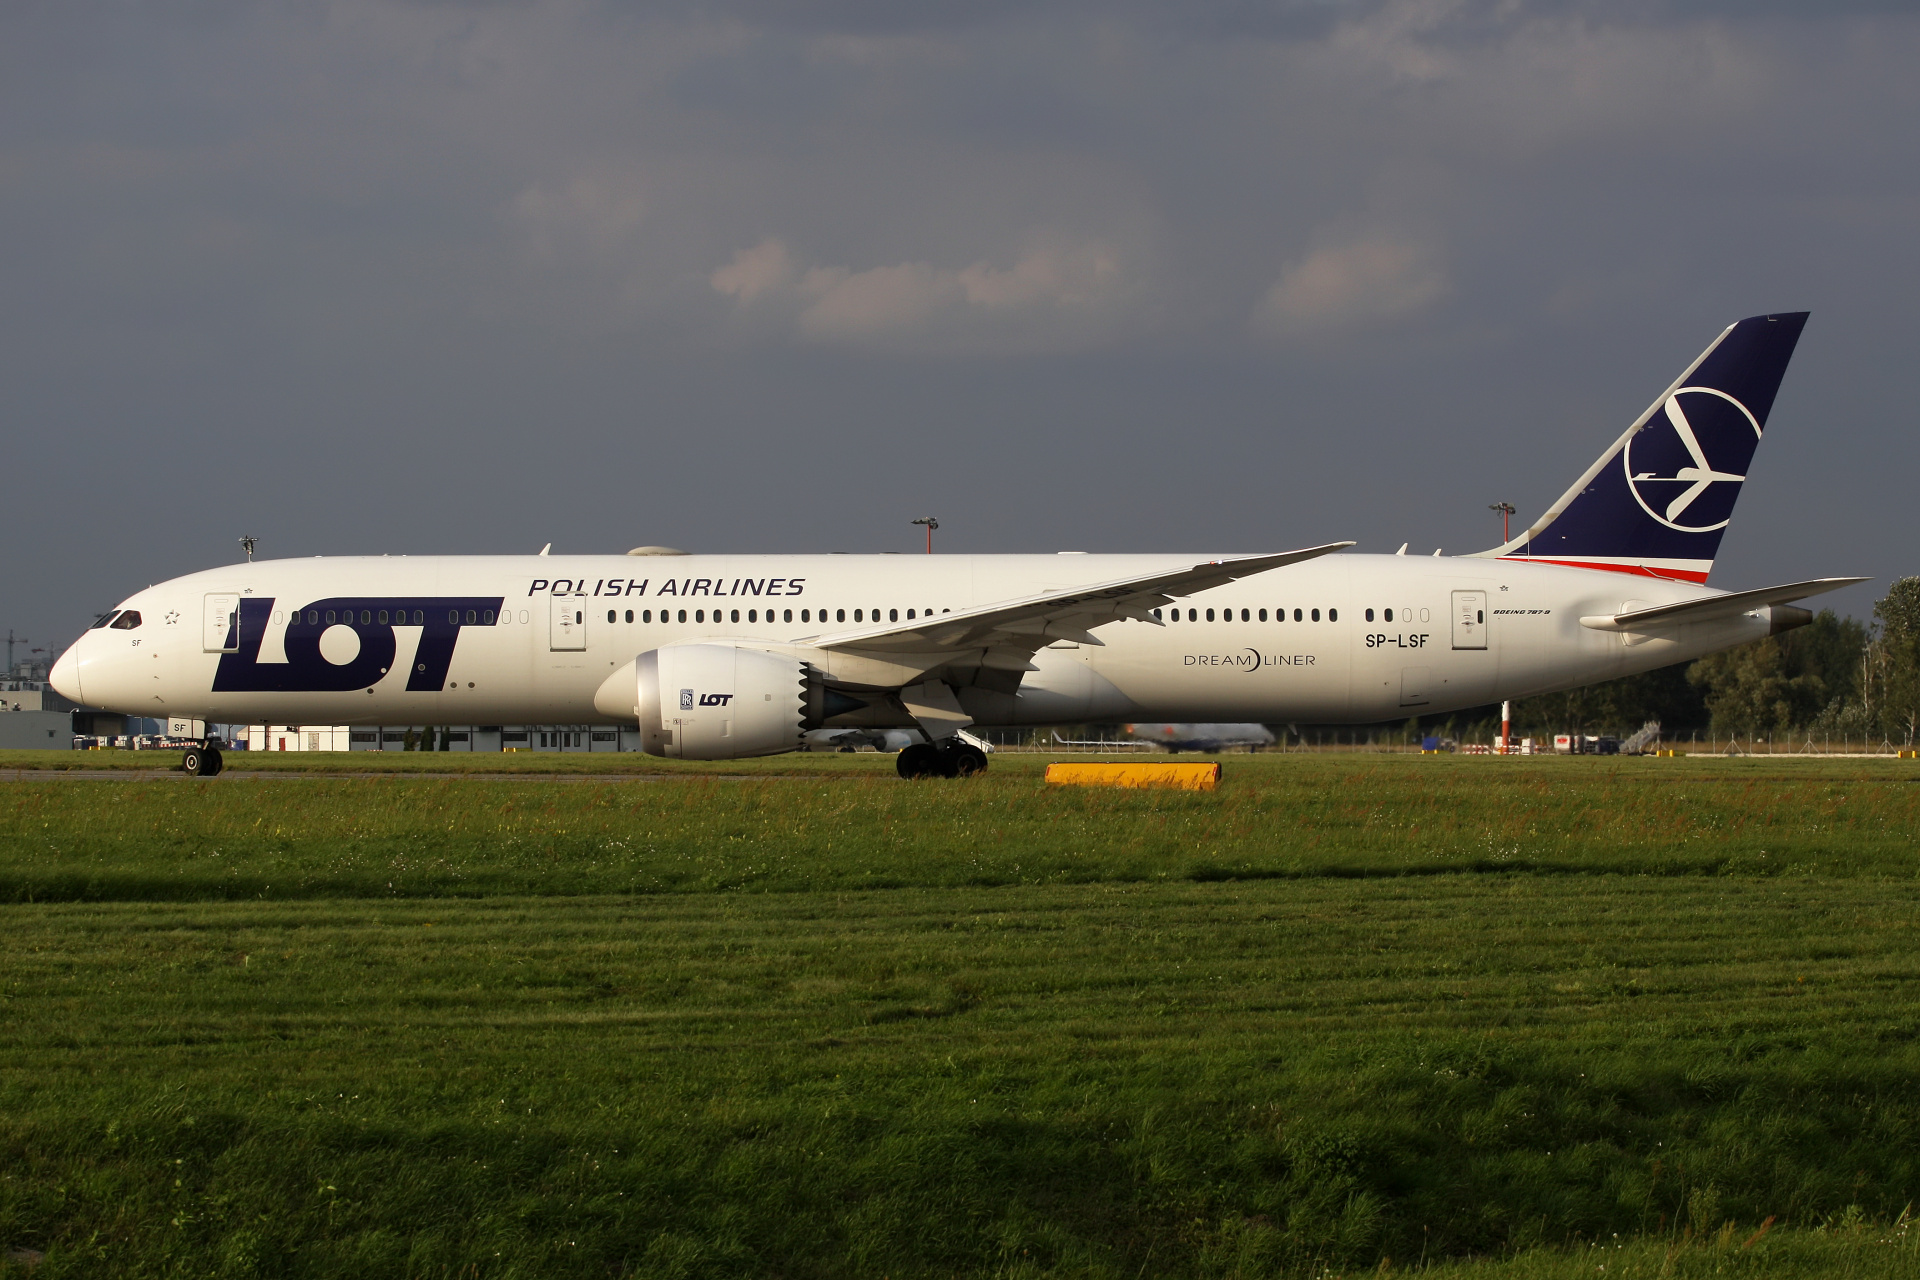 SP-LSF (Aircraft » EPWA Spotting » Boeing 787-9 Dreamliner » LOT Polish Airlines)